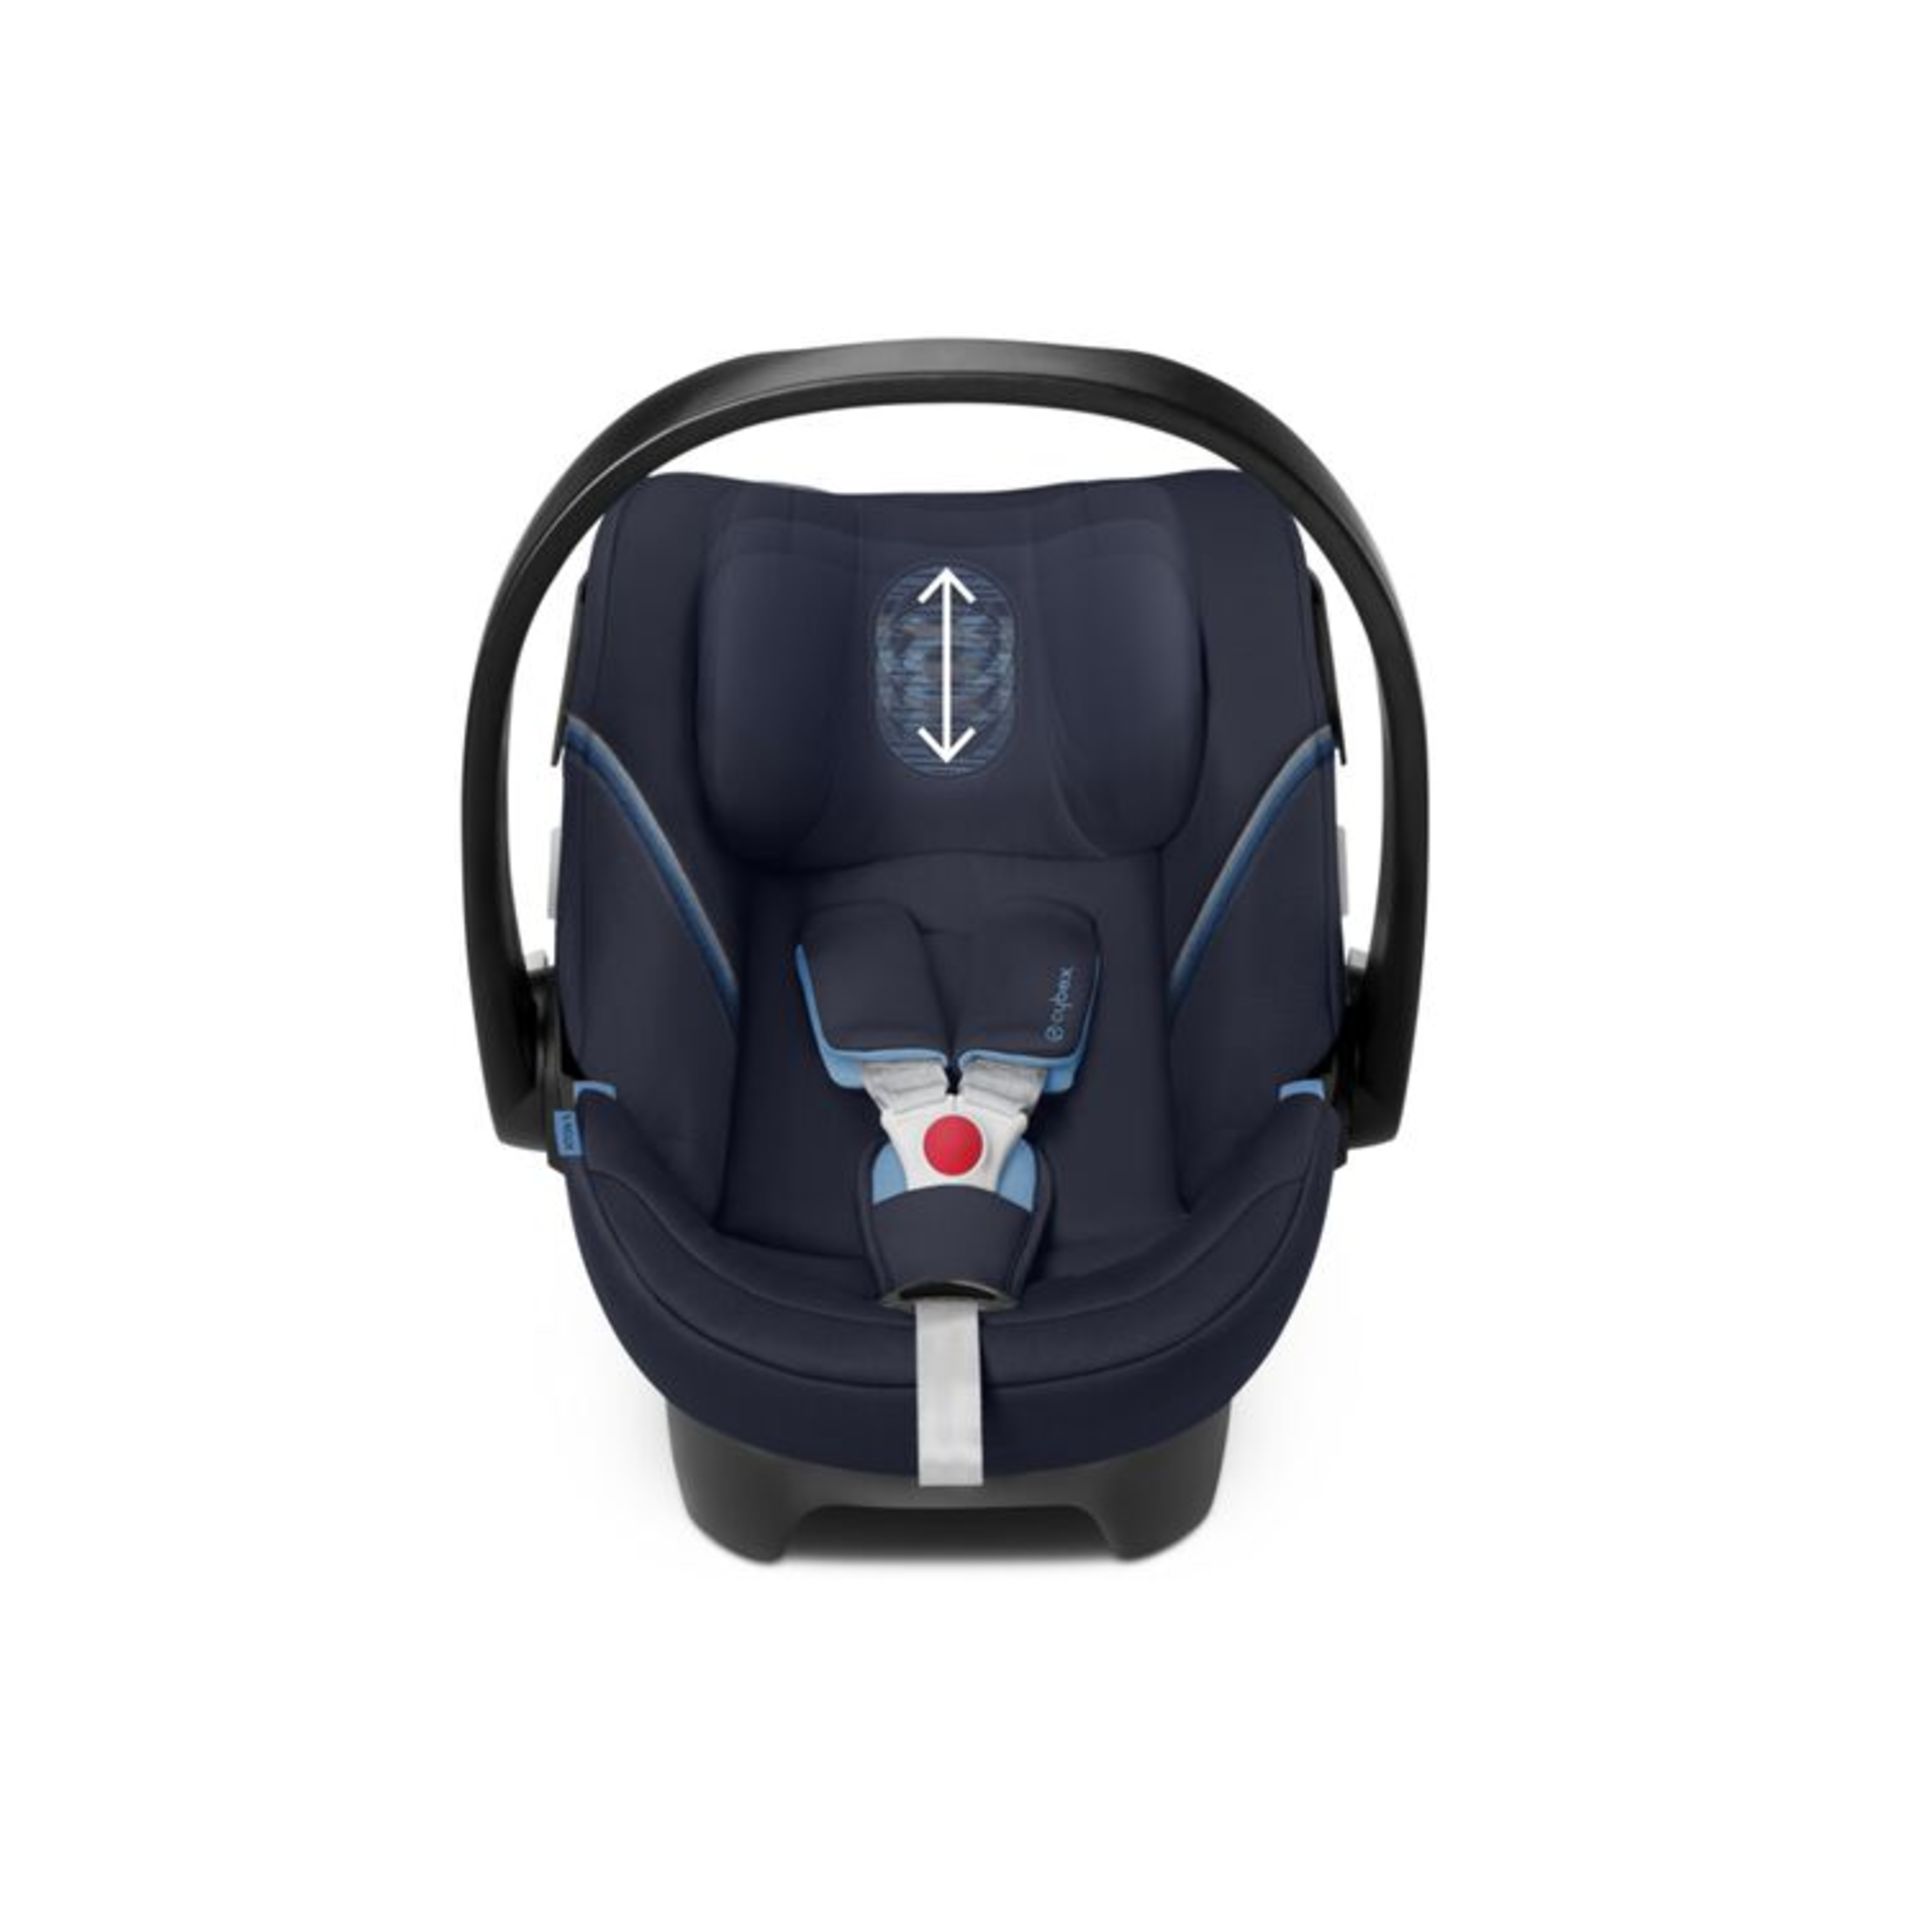 CYBEX ATON 5 INFANT CAR SEAT IN BLACK - RRP £149 - Image 5 of 6